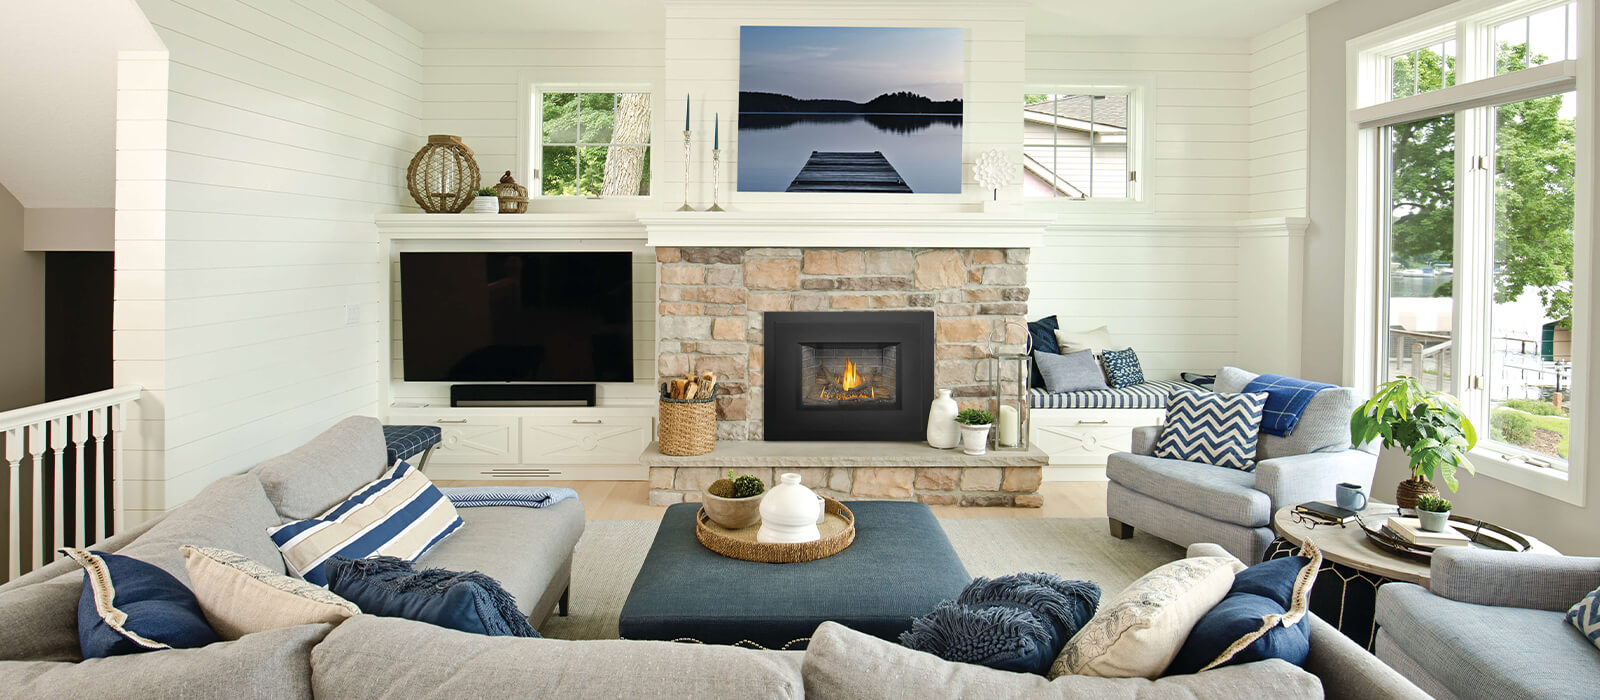 The perfect gas fireplace insert for smaller living spaces